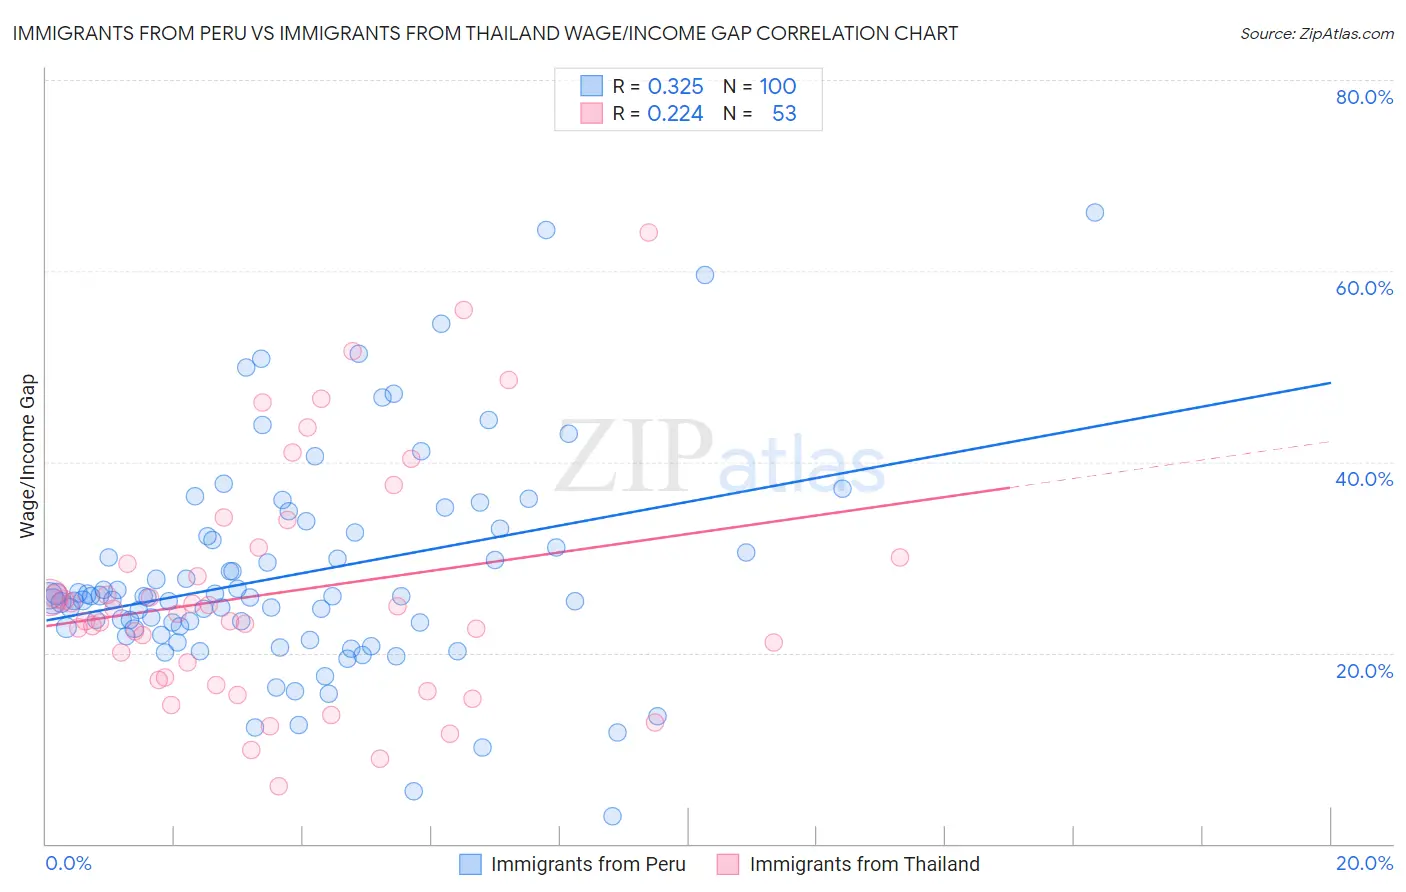 Immigrants from Peru vs Immigrants from Thailand Wage/Income Gap